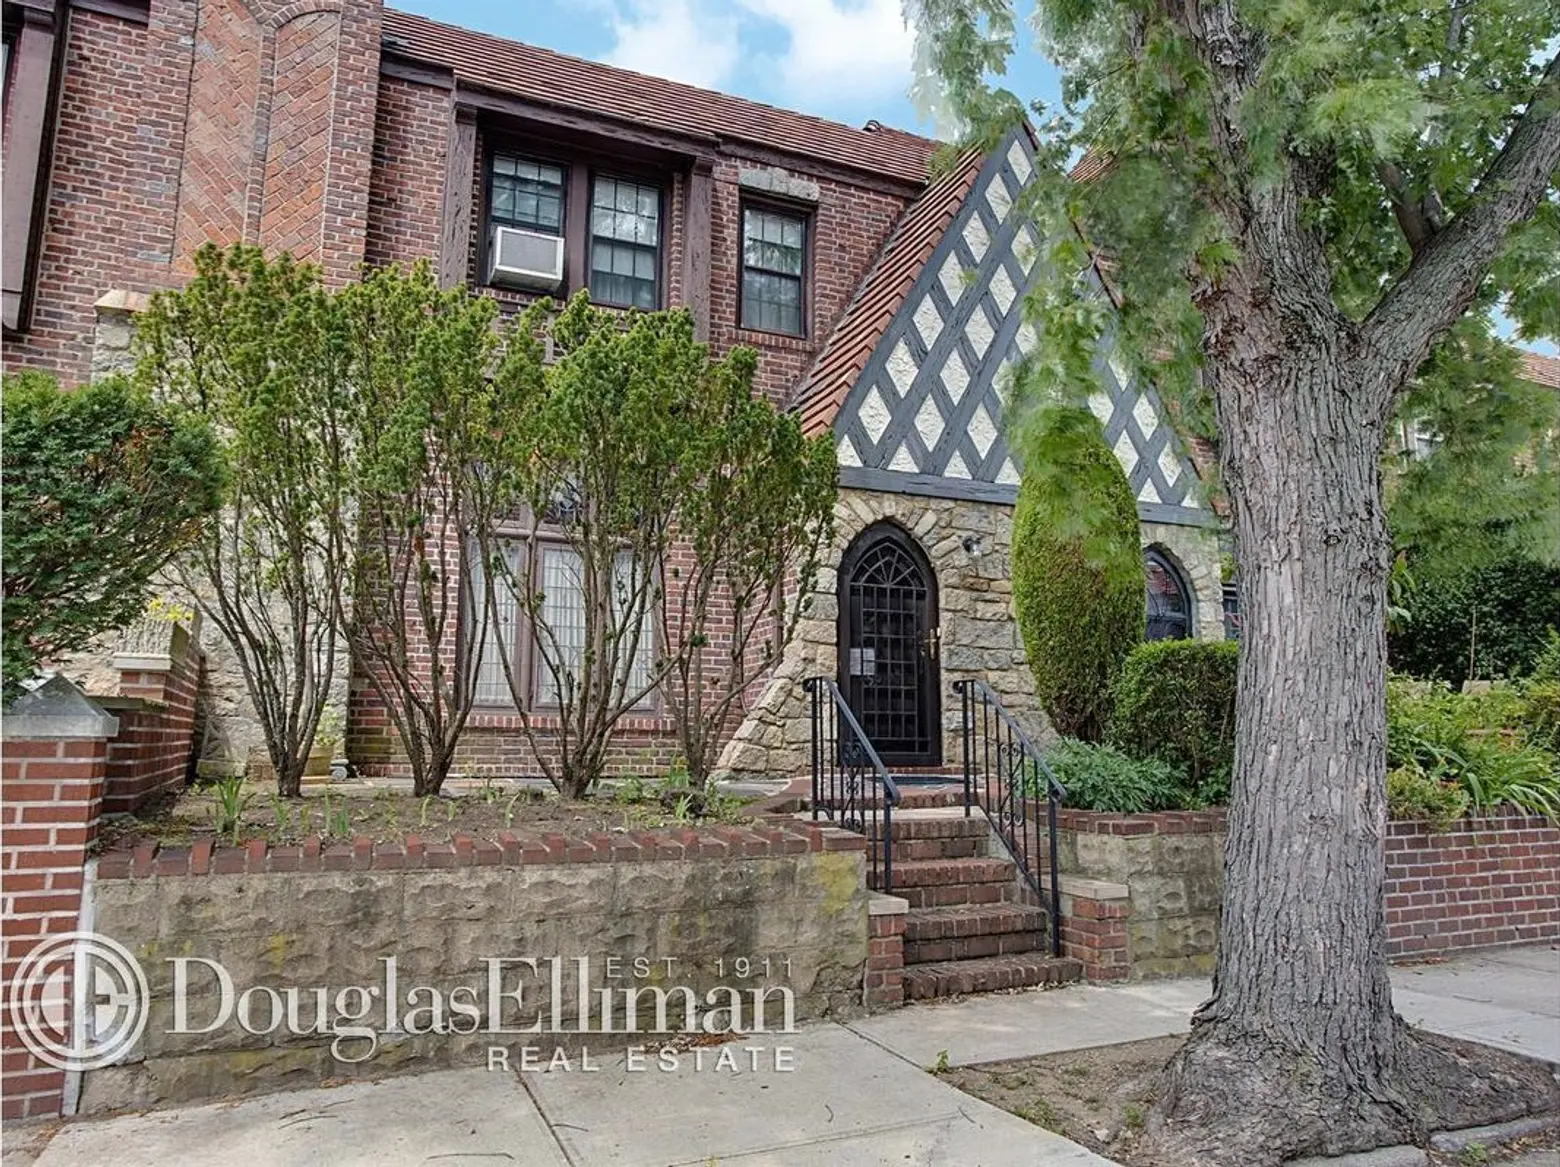 Enchanting 1930s Tudor Home Is Just $429K, but Also Way Out in Queens